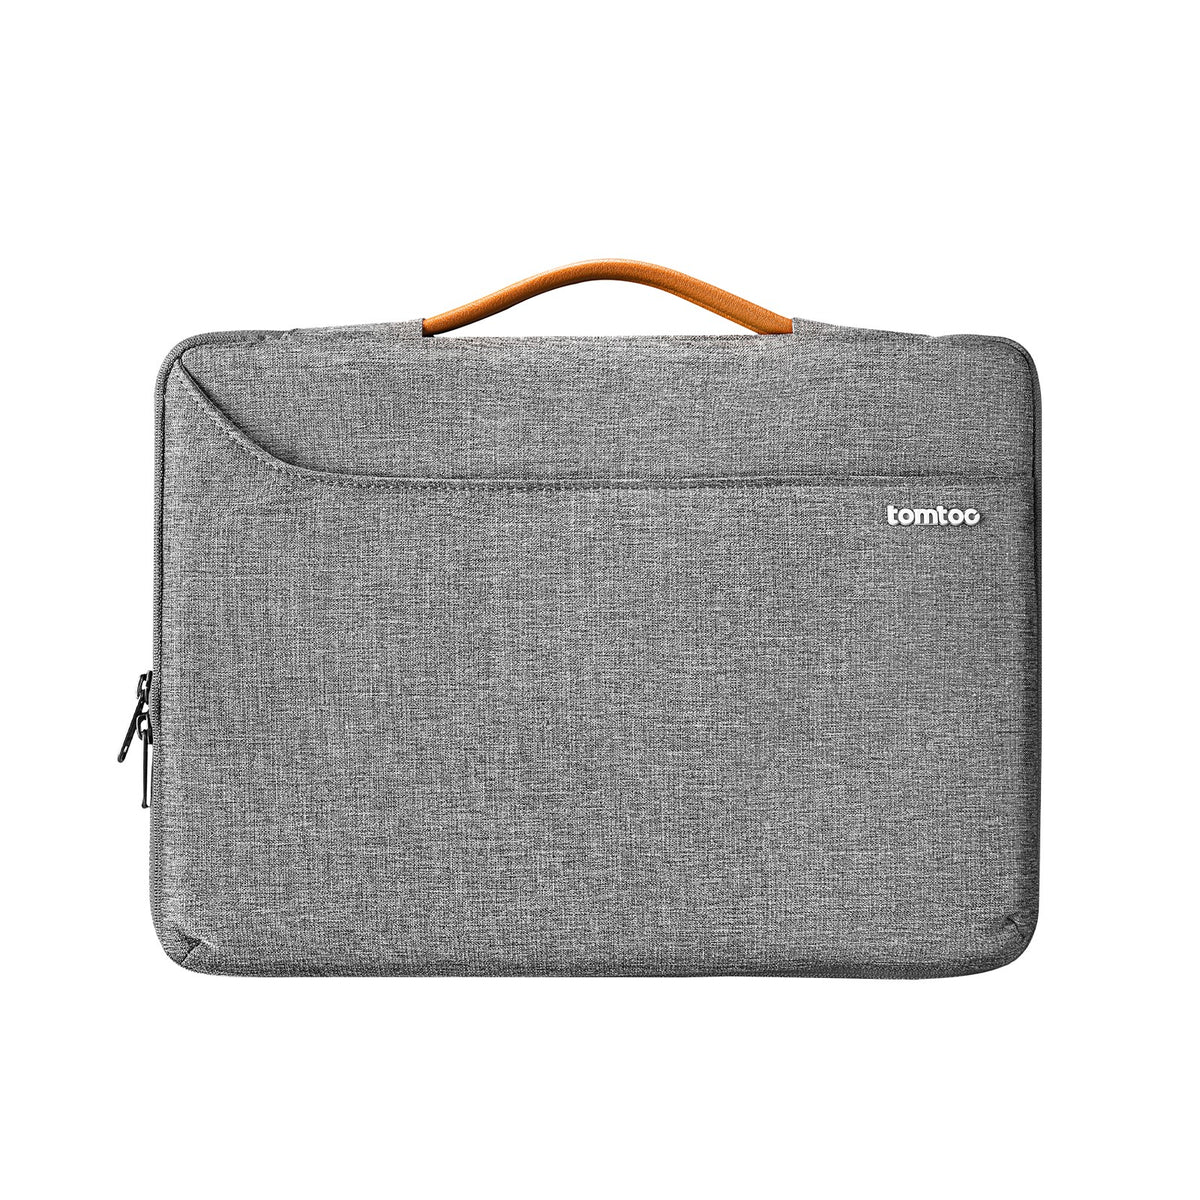 primary_Defender-A22 Laptop Briefcase For 13.5-inch Microsoft Surface Laptop/Book | Gray